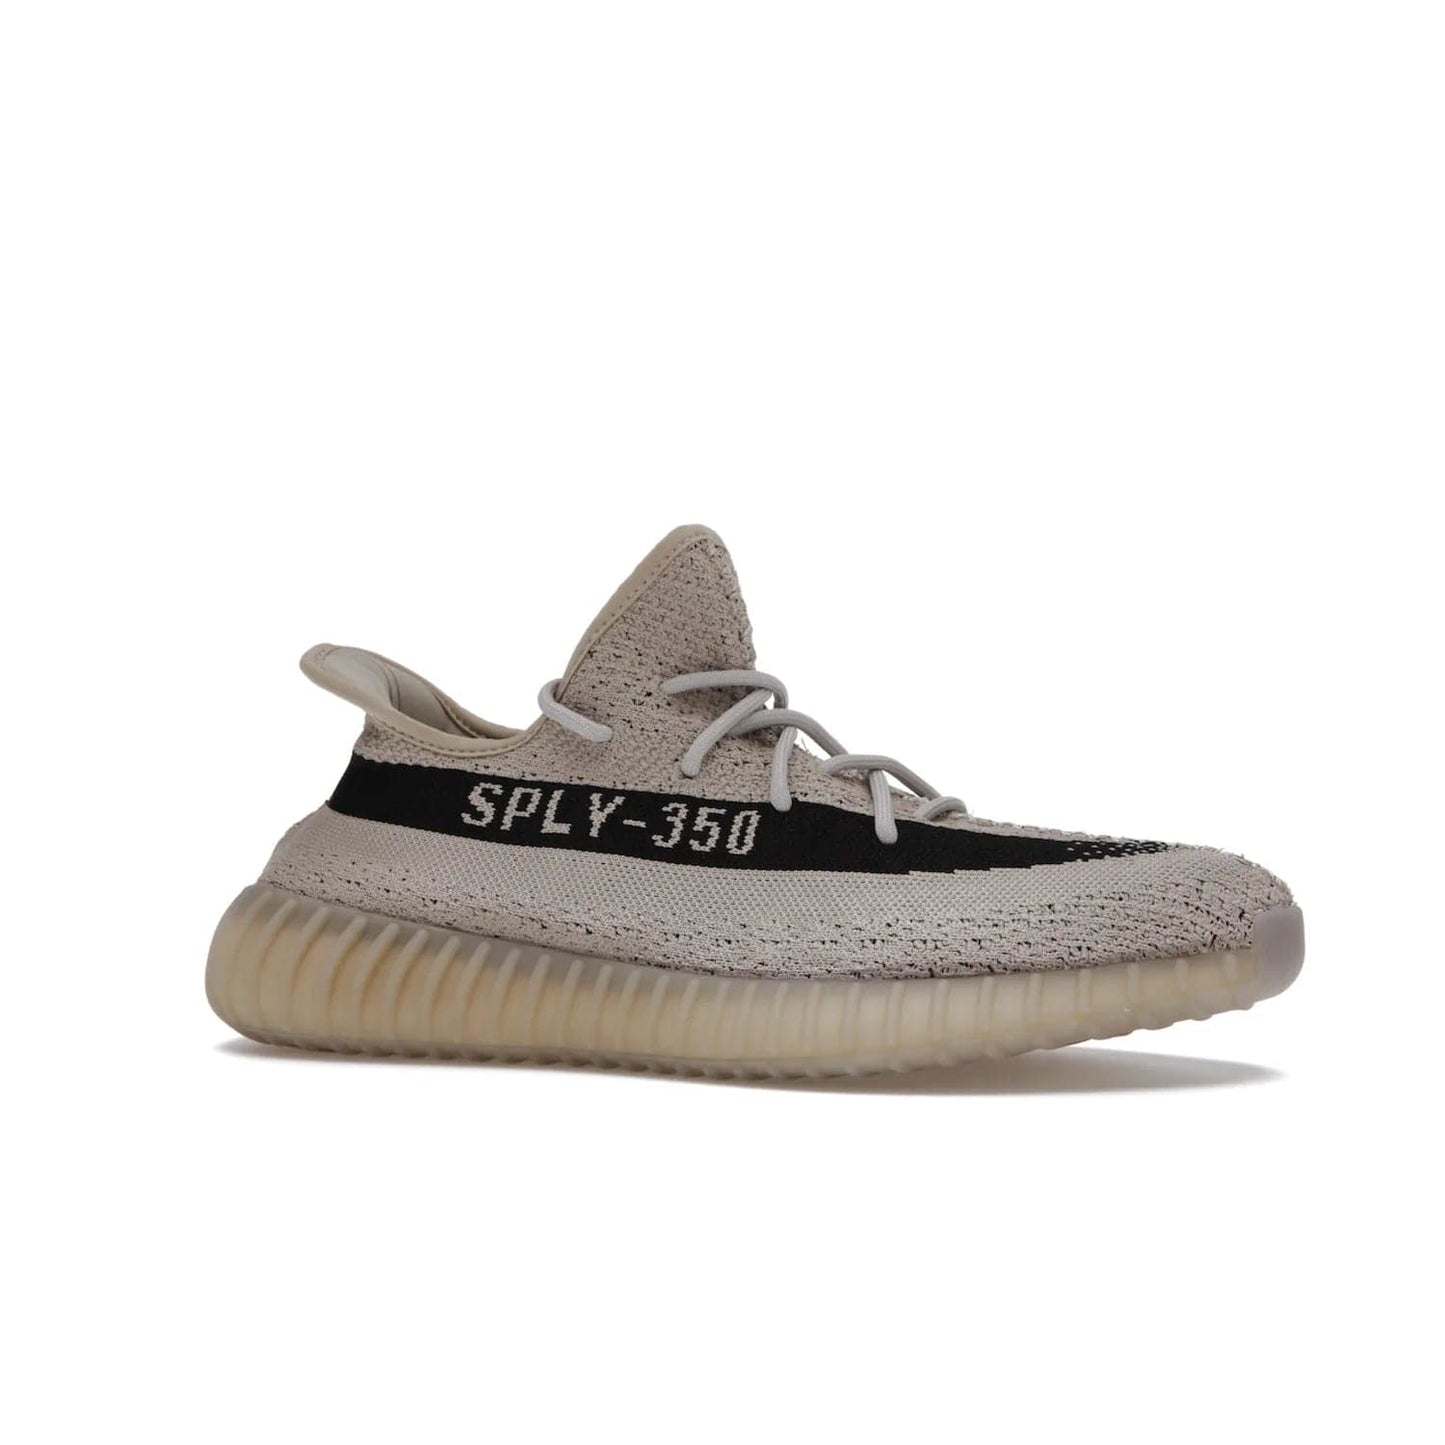 adidas Yeezy Boost 350 V2 Slate - Image 3 - Only at www.BallersClubKickz.com - Adidas Yeezy Boost 350 V2 Slate Core Black Slate featuring Primeknit upper, Boost midsole and semi-translucent TPU cage. Launched on 3/9/2022, retailed at $230.